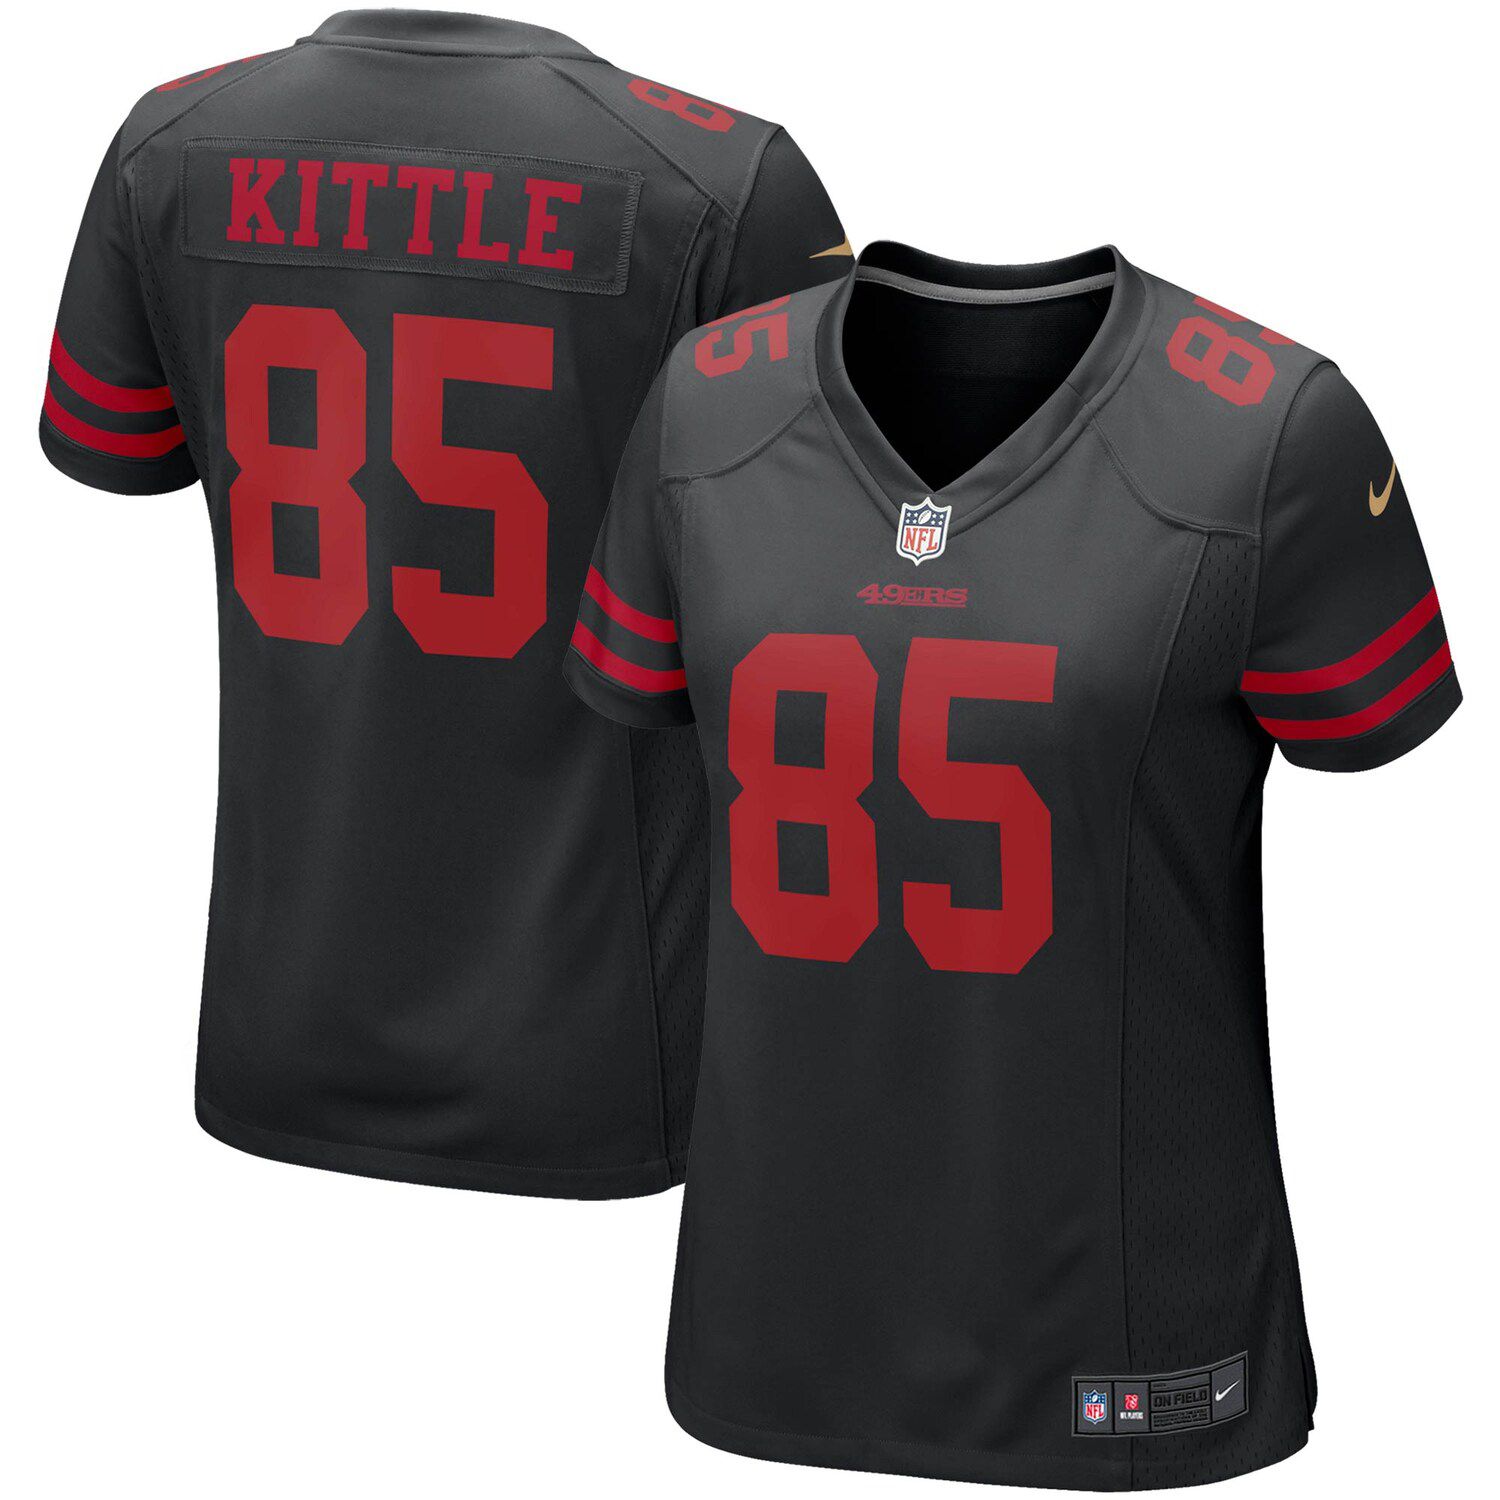 george kittle red jersey